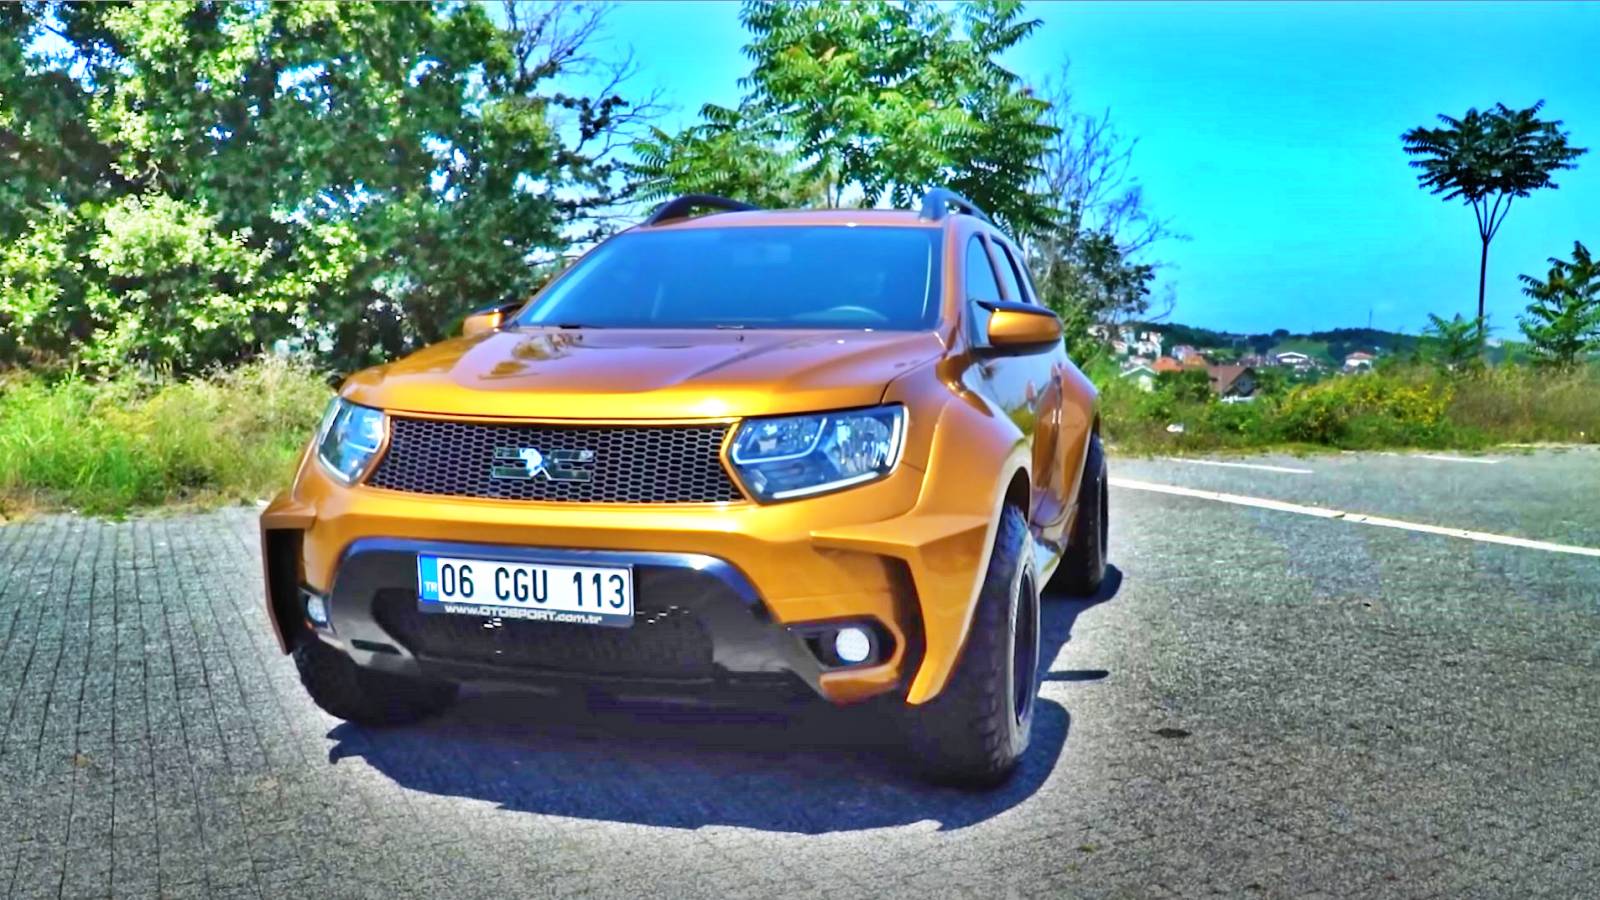 DACIA Duster The SPECIAL Model that Should Be Released Much Early